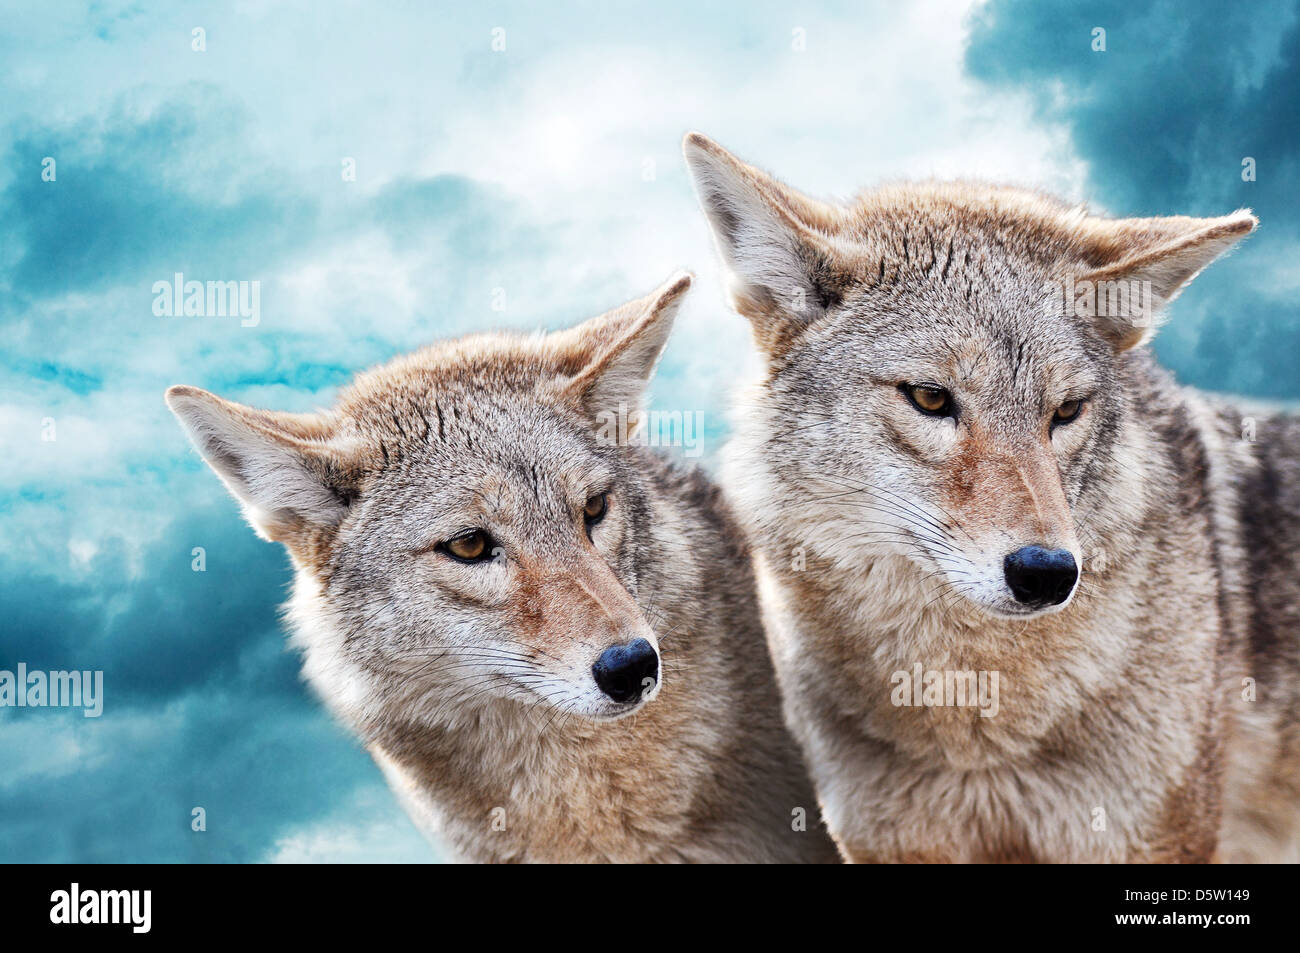 Coyote pair against the blue winter sky. Animals in the wild. Stock Photo